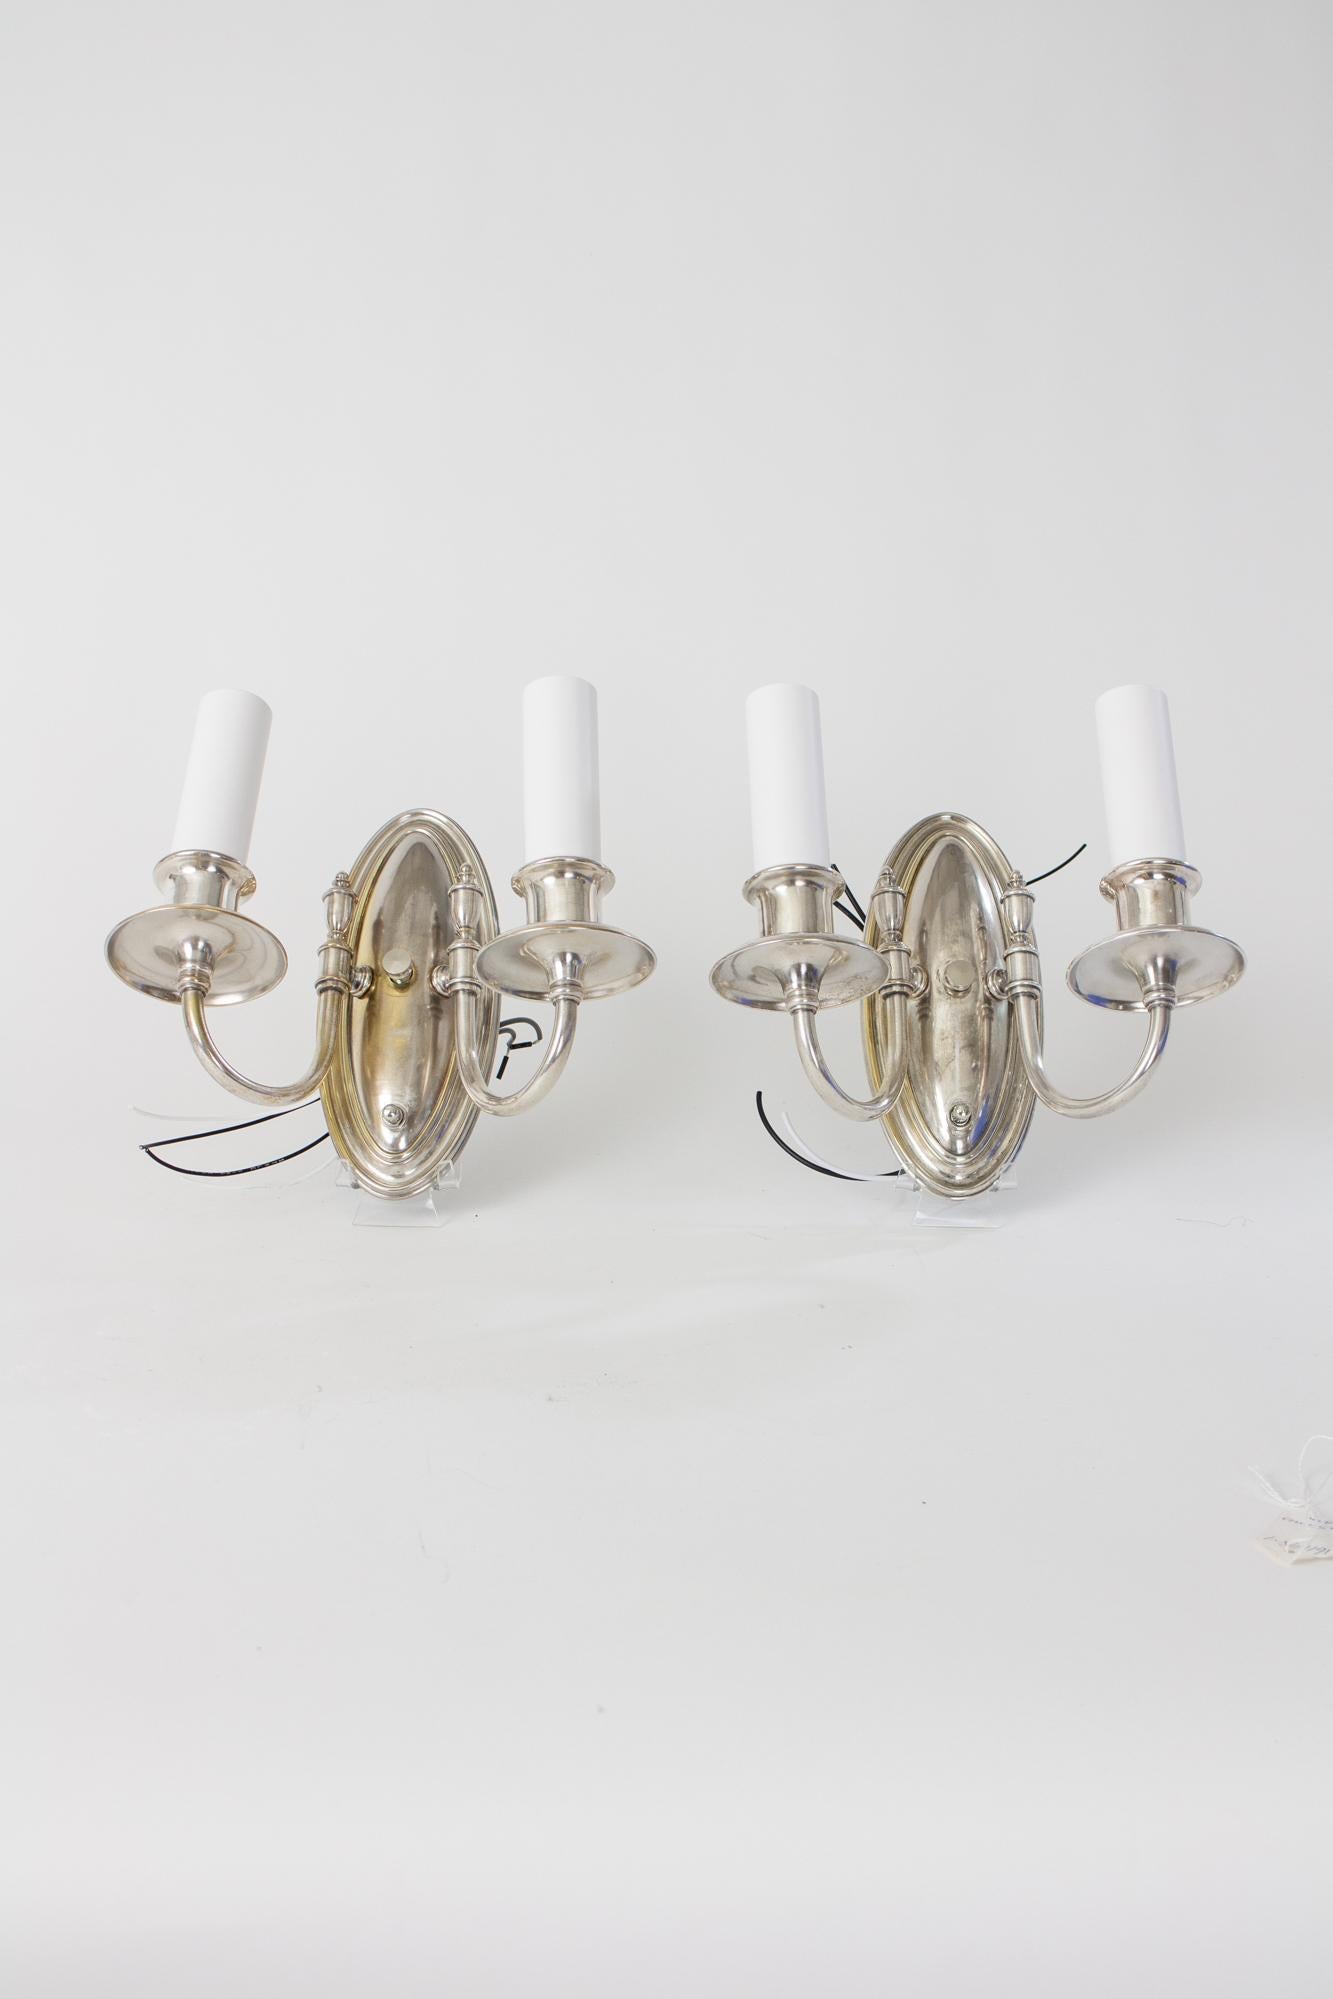 Early 20th century double arm silver sconces. Neoclassical style. Oval backplate with delicate arms that reach up to two lights. Urn shaped ornament on arms, White Candlecovers. Restored and rewired. Complete and ready for installation. Worn antique